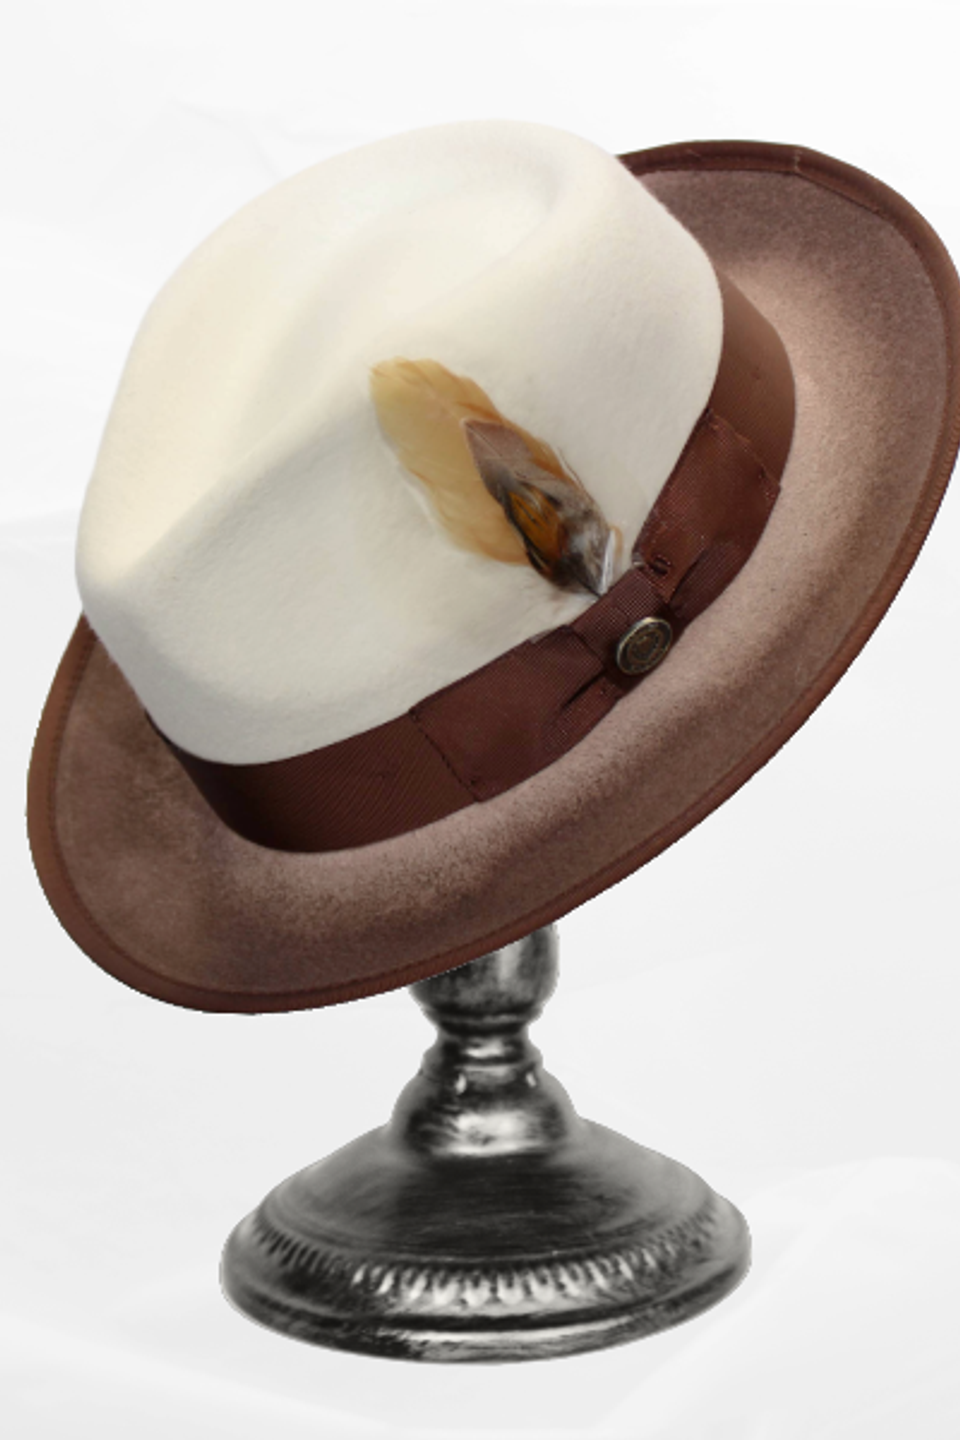 White and brown hat